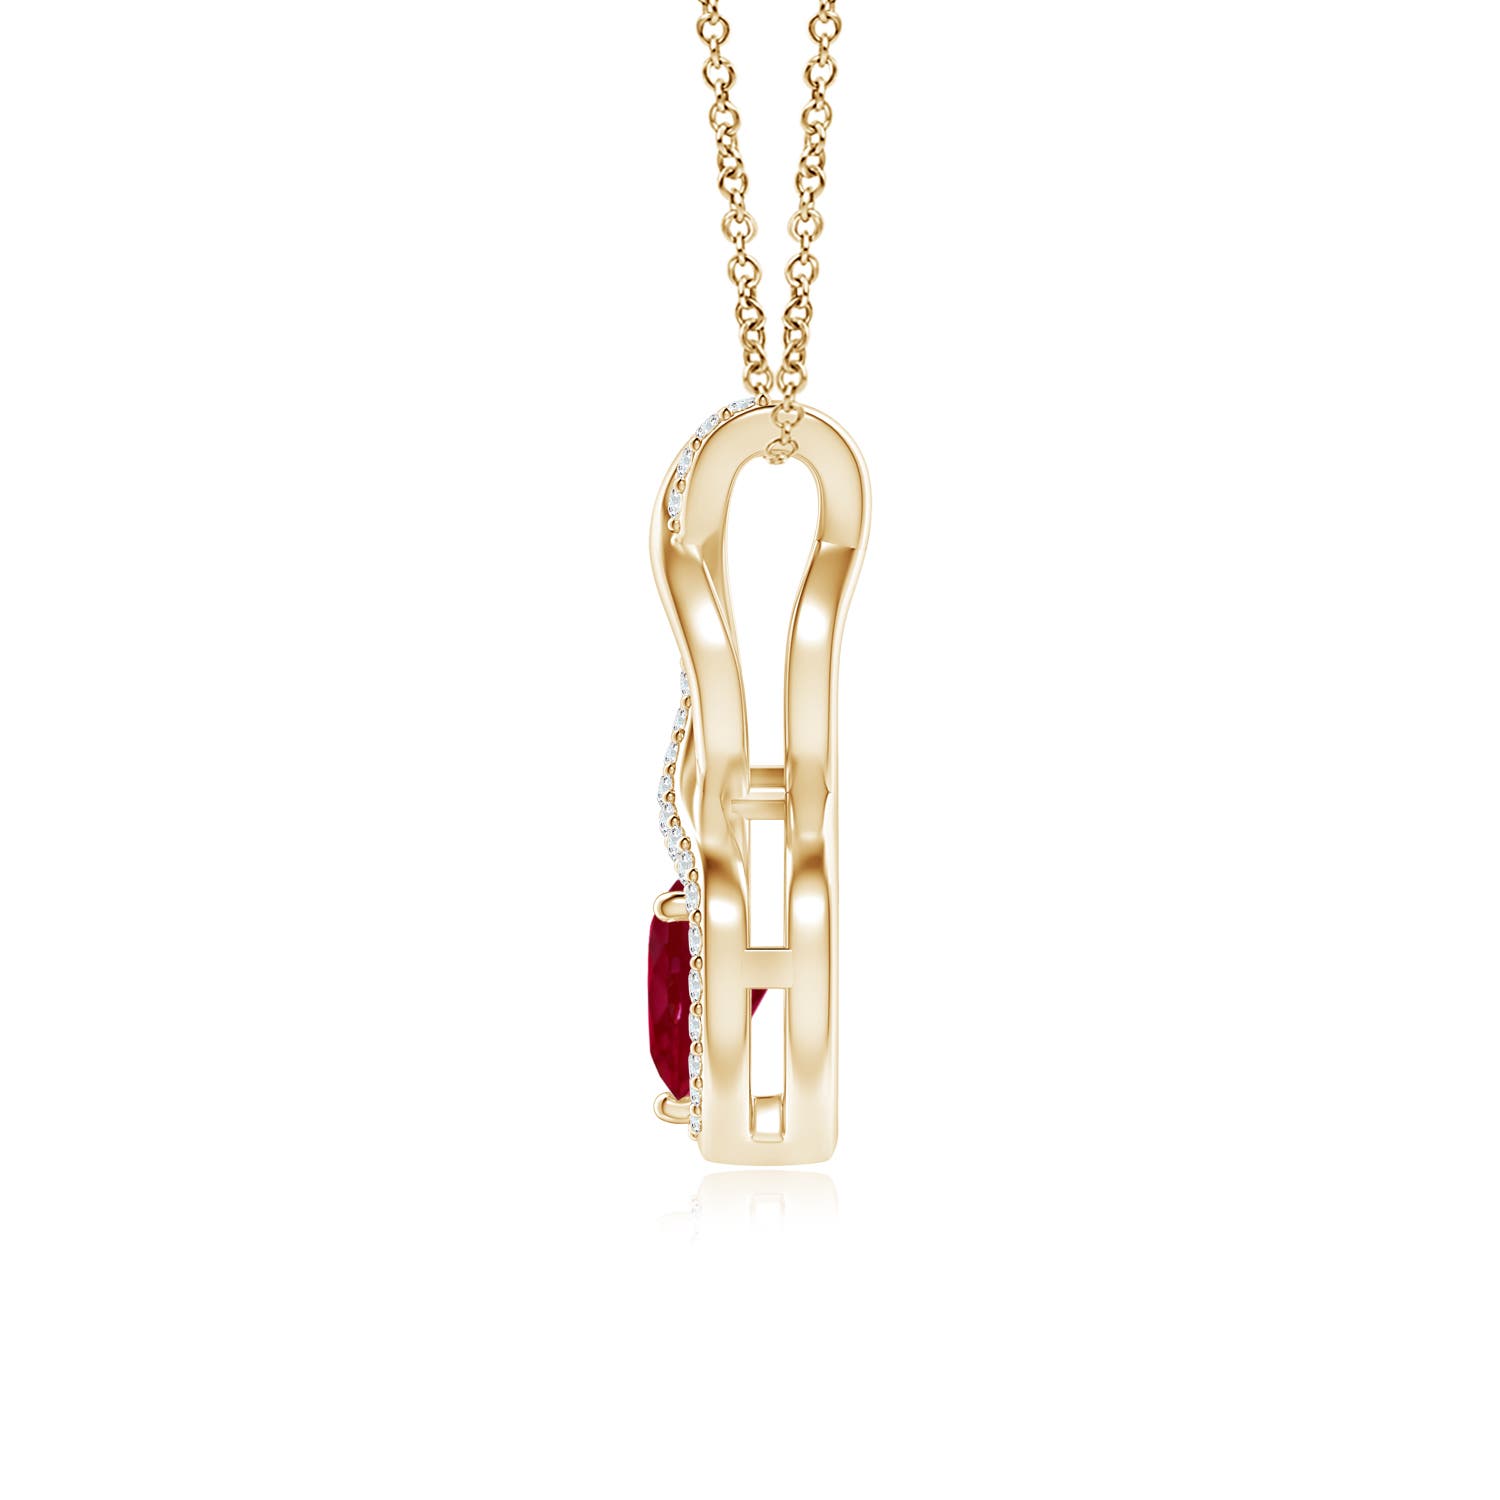 AA - Ruby / 0.61 CT / 14 KT Yellow Gold